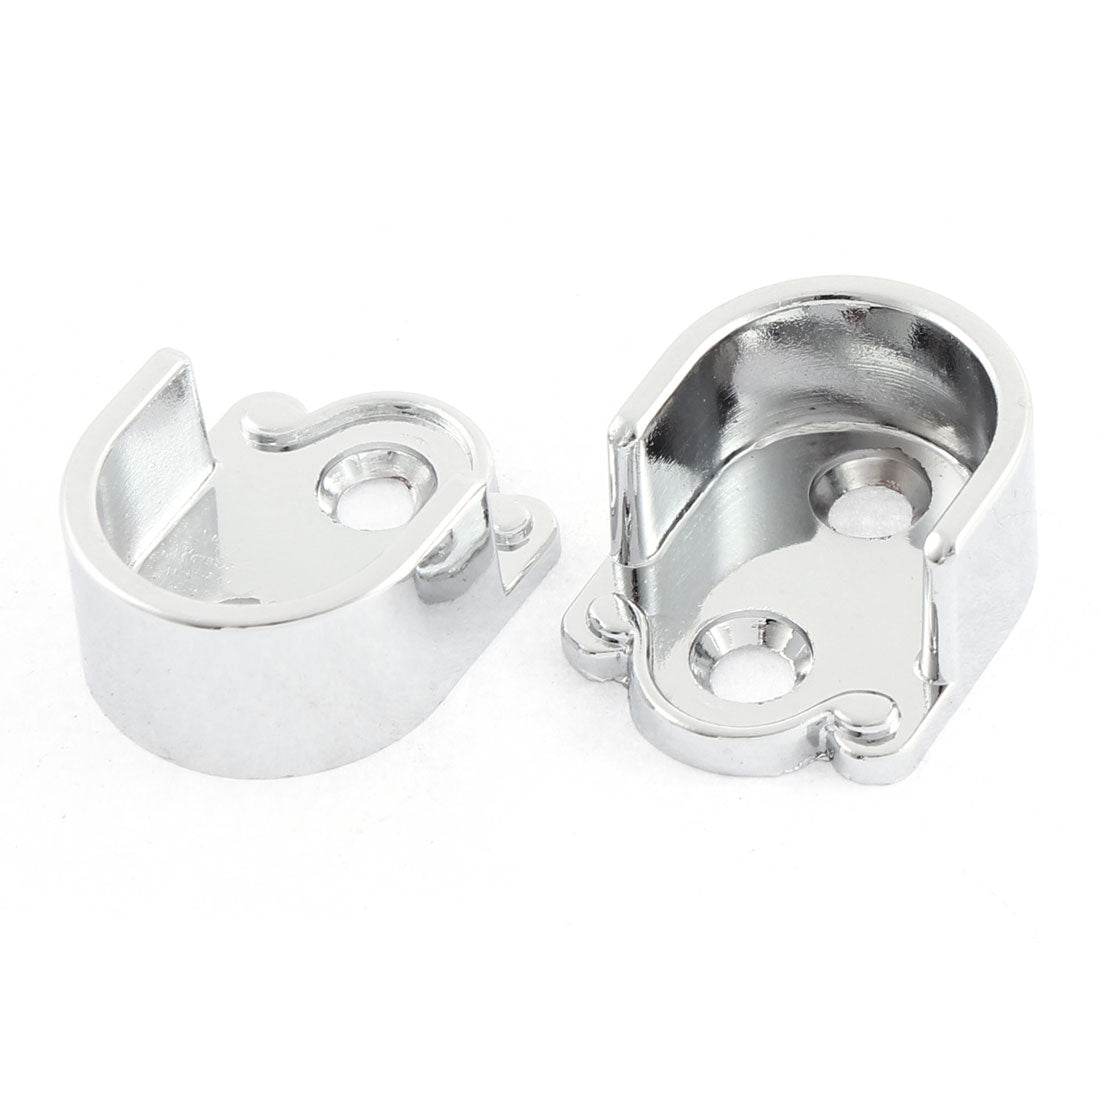 uxcell Uxcell Metal 19mm Dia Clothes Closet Rod Flange Holder Bracket 2 Pcs Silver Tone